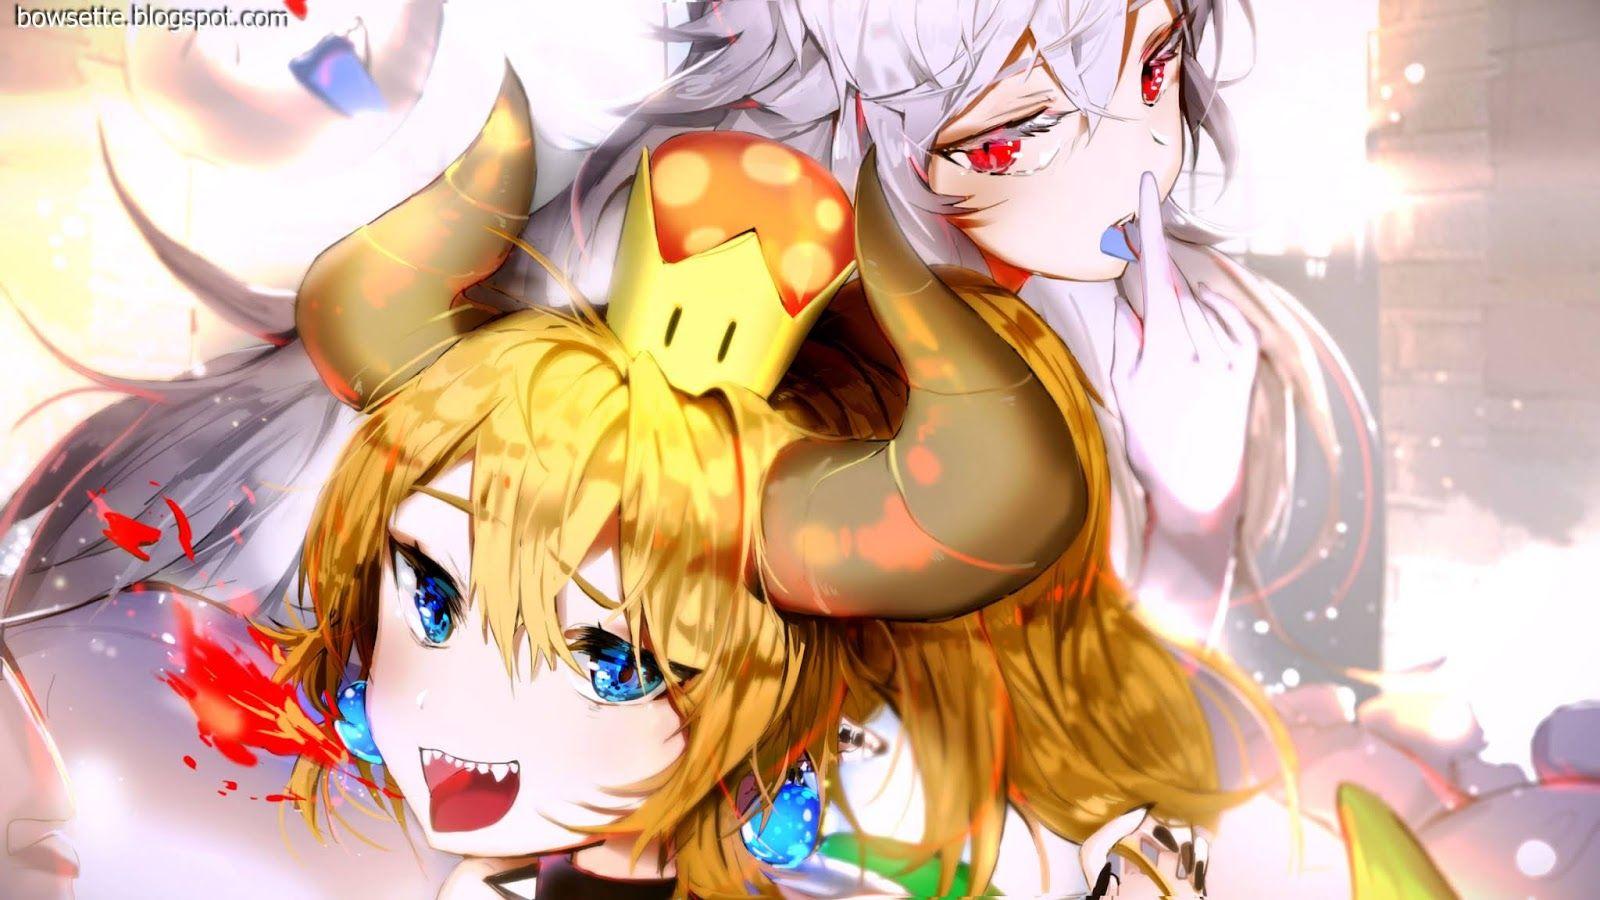 Bowsette  Live Wallpaper APK Android App  Free Download